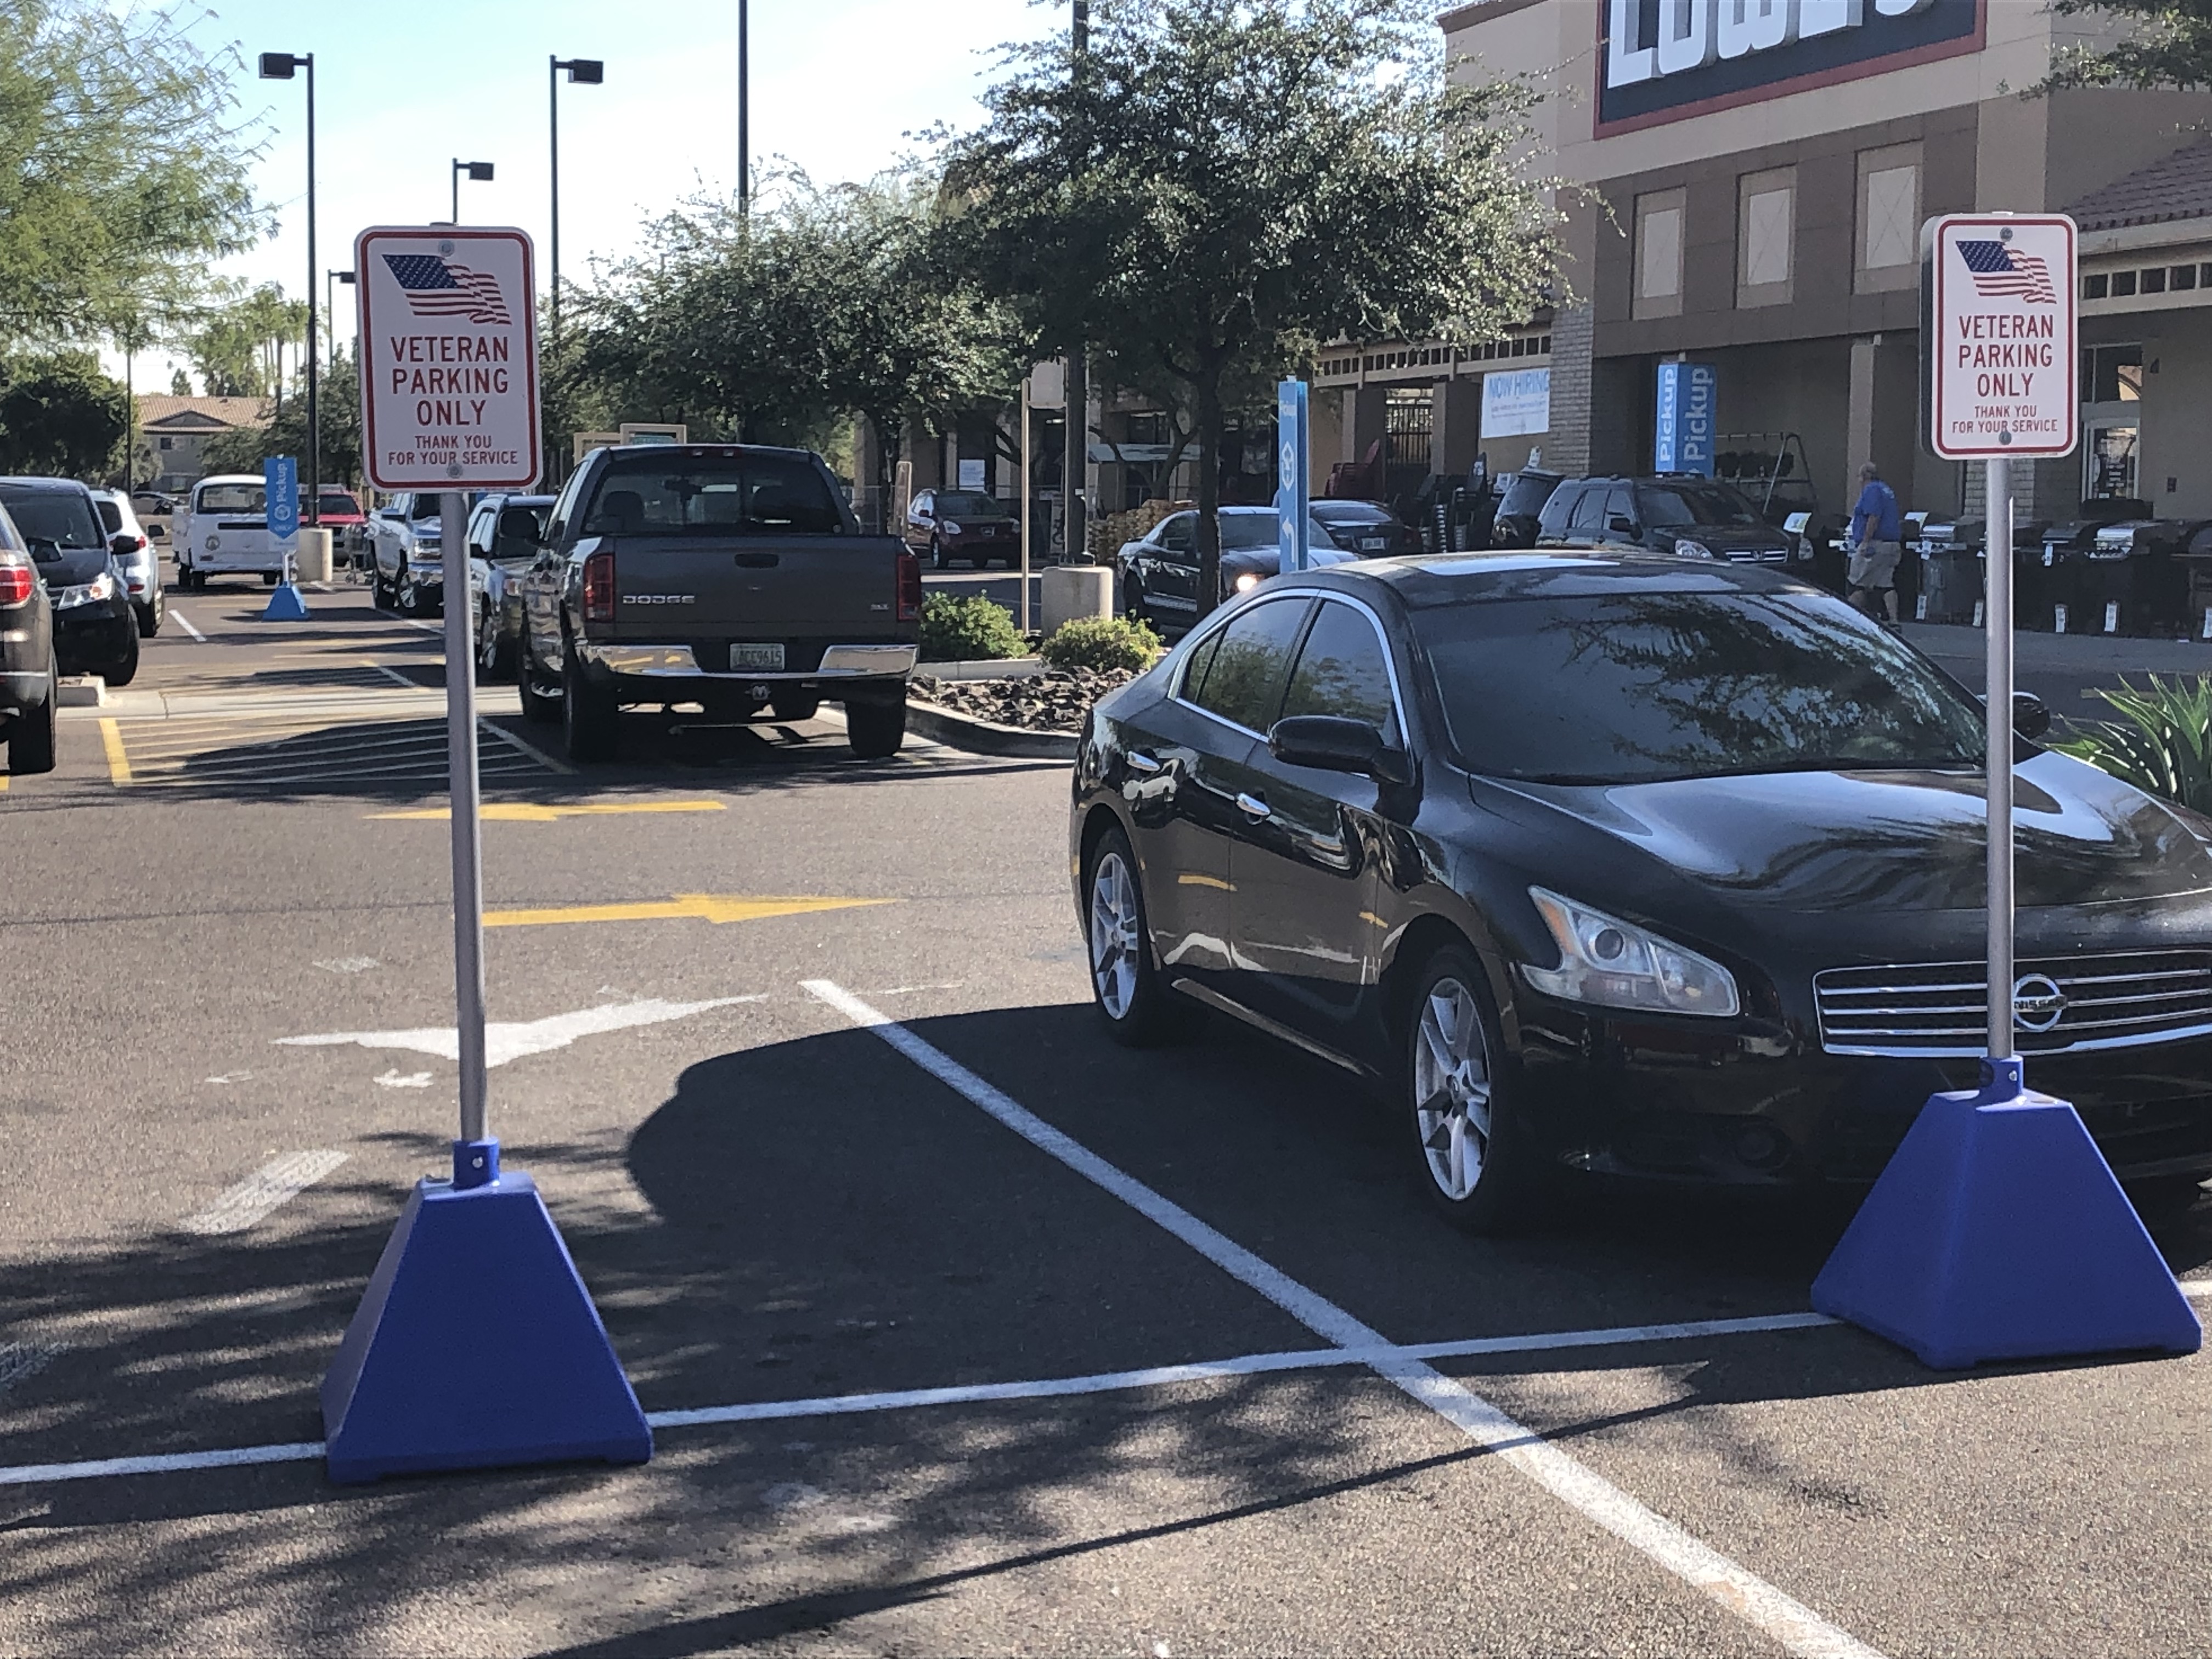 Blue Pyramid Sign Bases for Veteran Parking at Lowe's